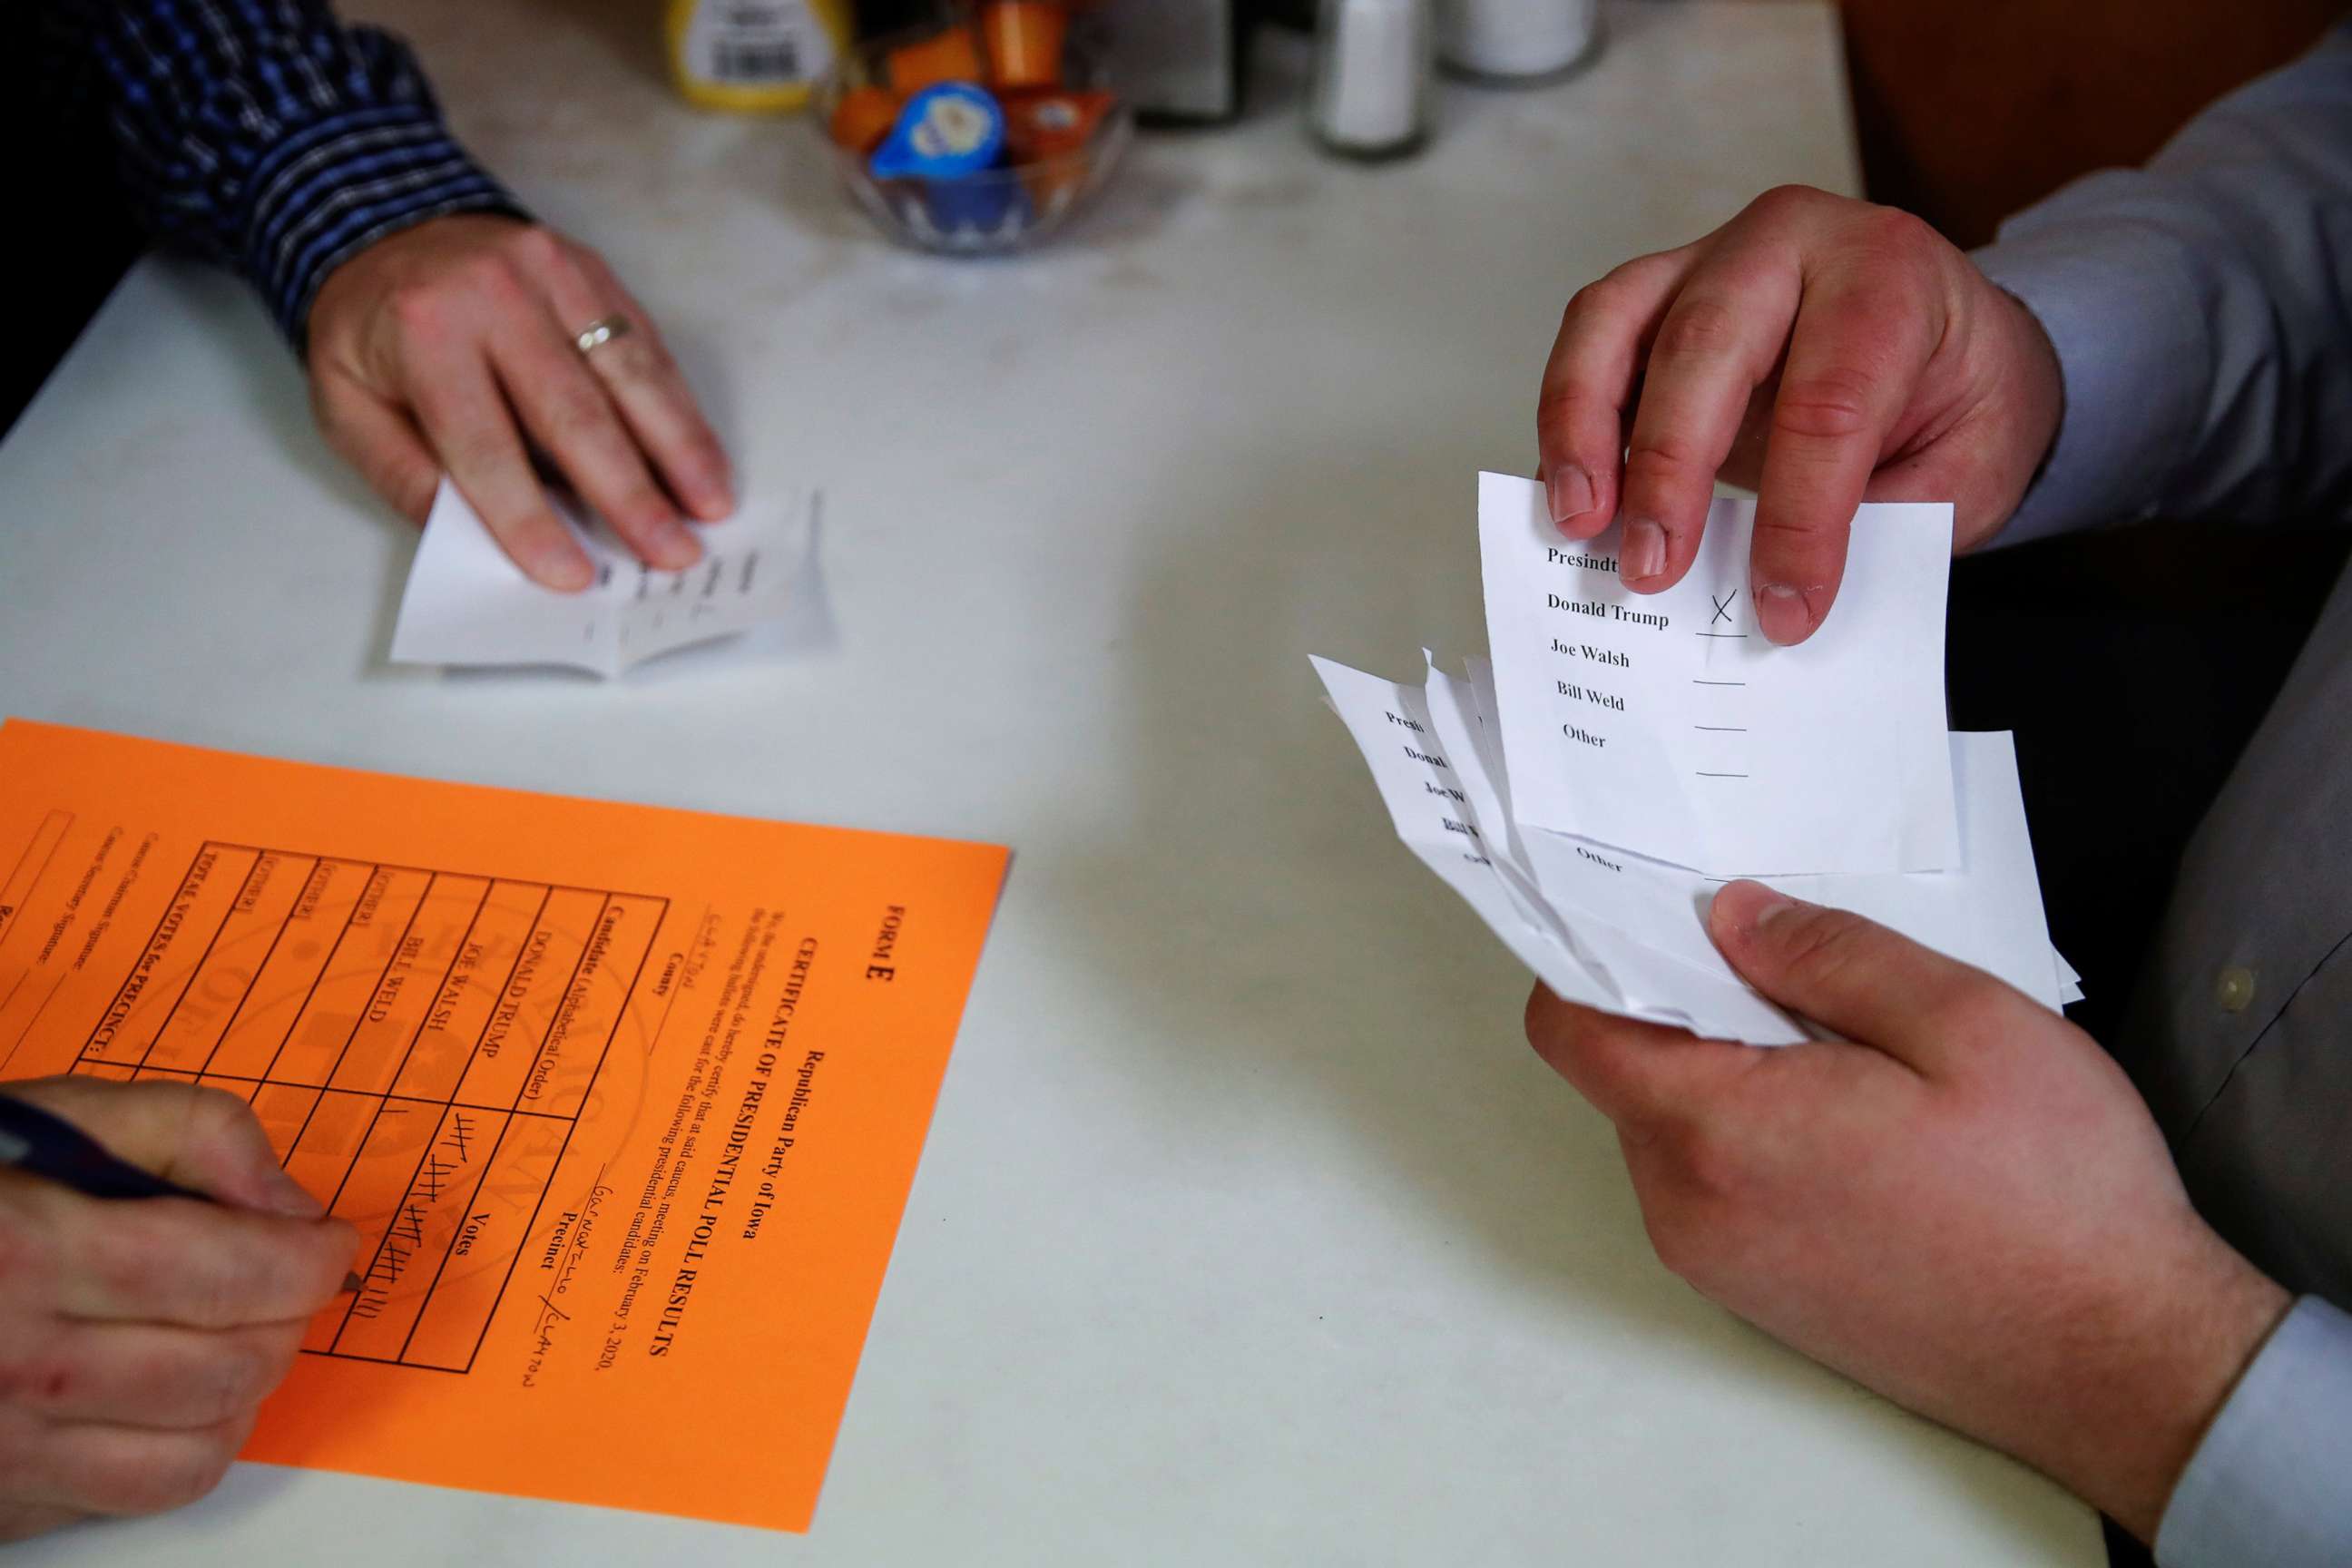 PHOTO: Votes are seen during the Republican caucus at Thoma Dairy Bar Cafe in Garnavillo, Iowa, Feb. 3, 2020.